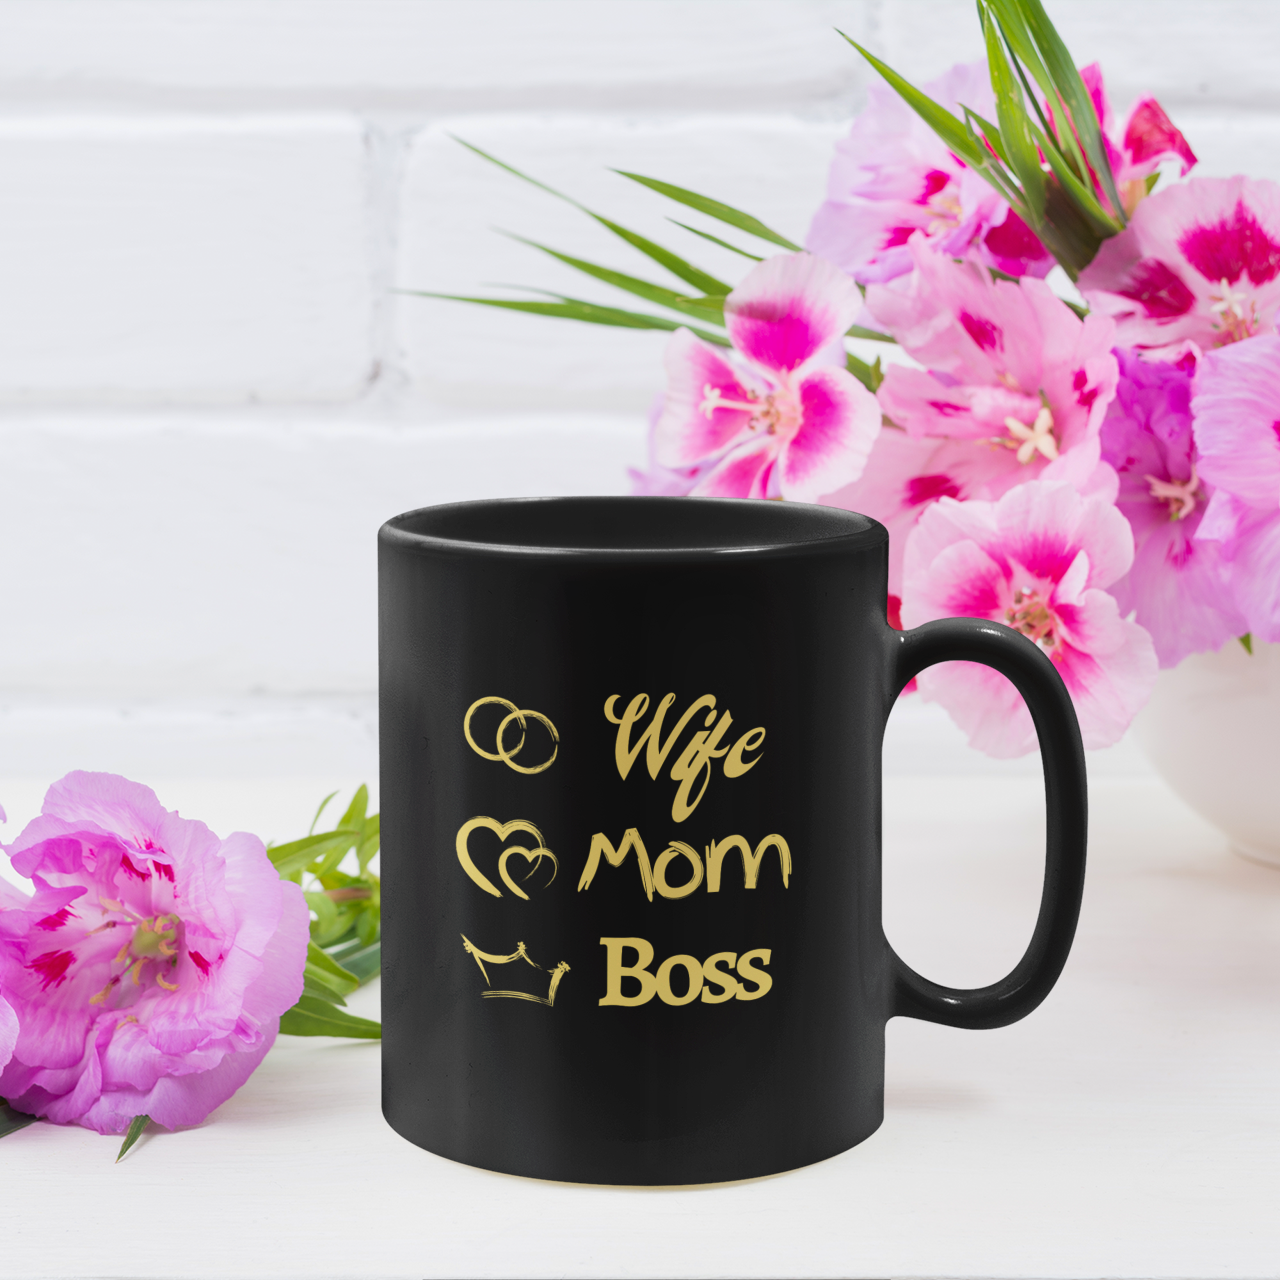 Motivational Mugs with the words Wife Mom Boss - morning affirmations mug gift ideas